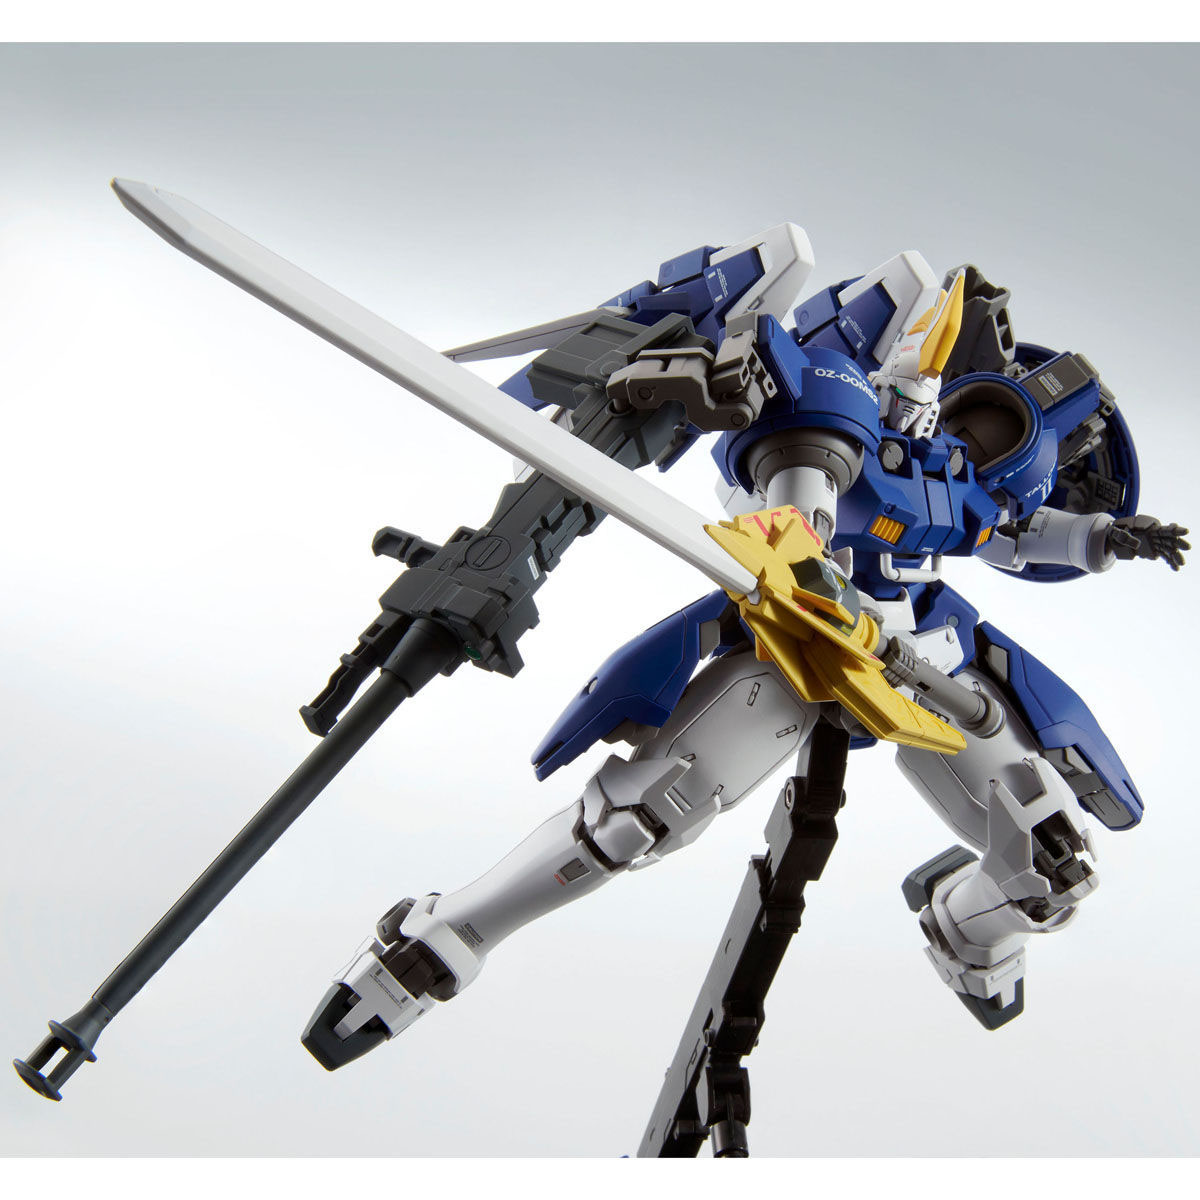 With Bonus] D House Prime Body Upgrade Kit For 1/12 Mobile Suit